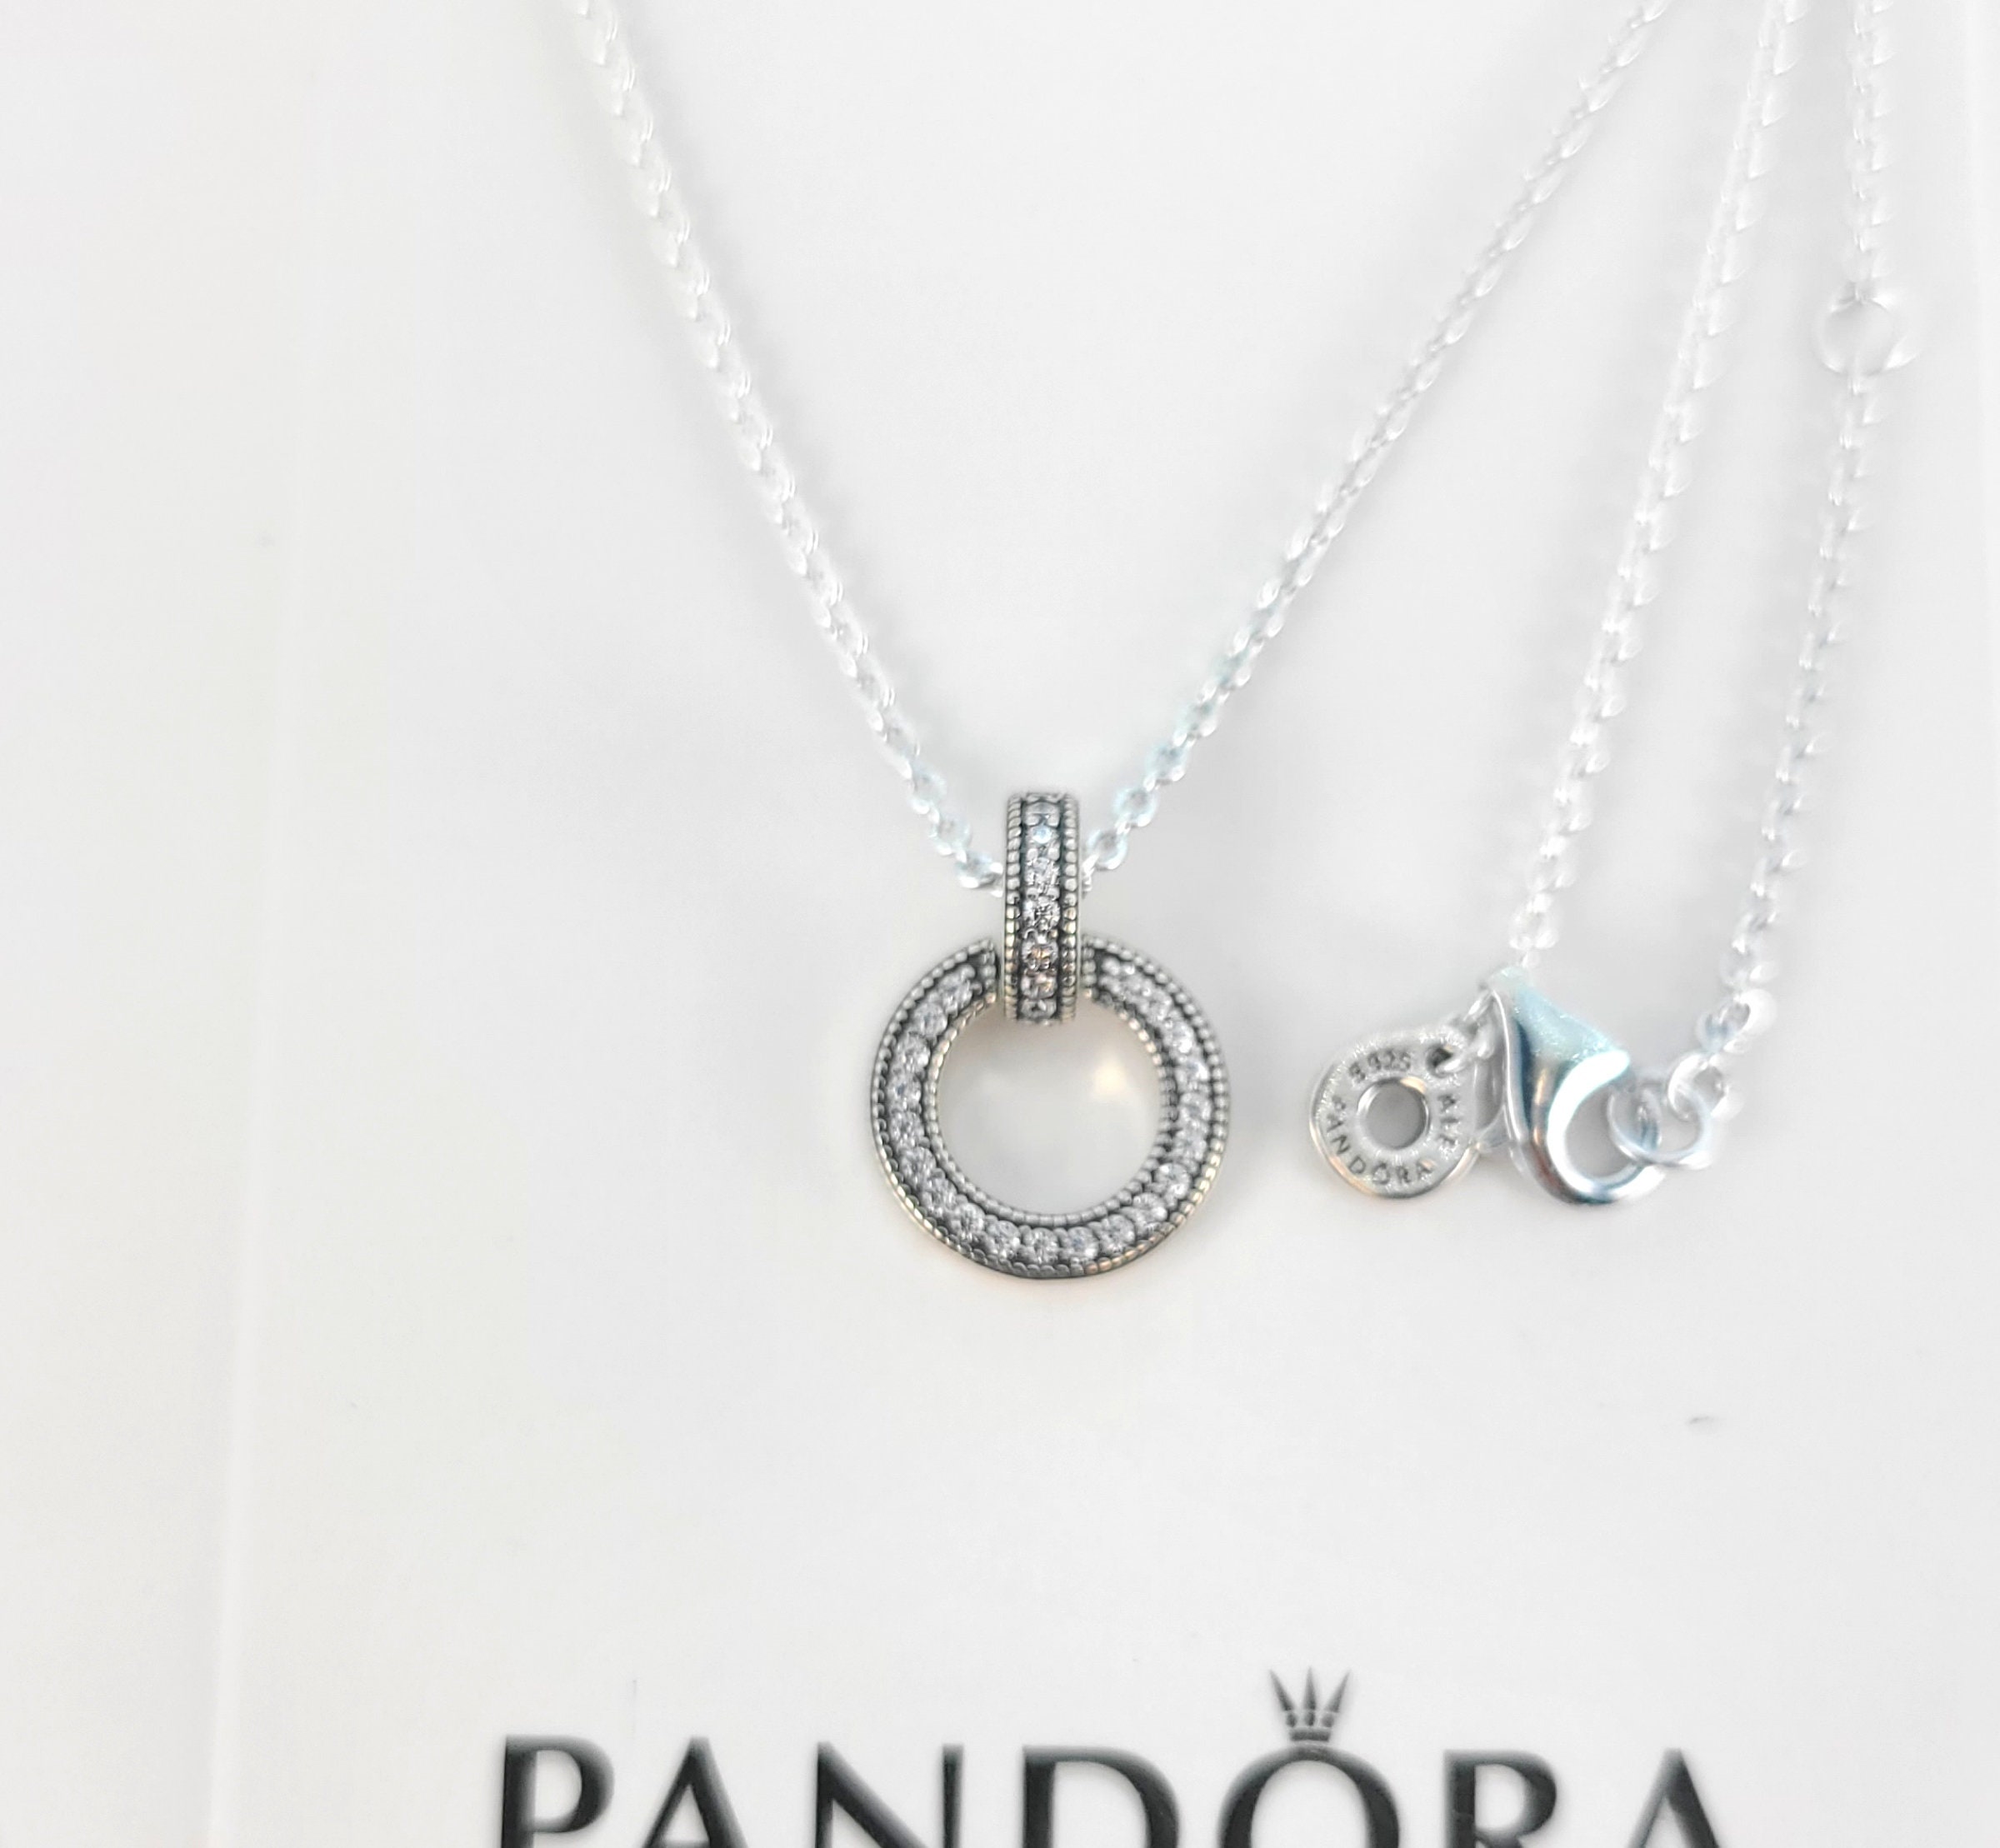 925 Sterling Silver Double Circle Pendant Heart Necklace Chain For Women  Men Fit Pandora Style Necklaces Gift Jewelry 399487C01 45 From Fine18,  $16.93